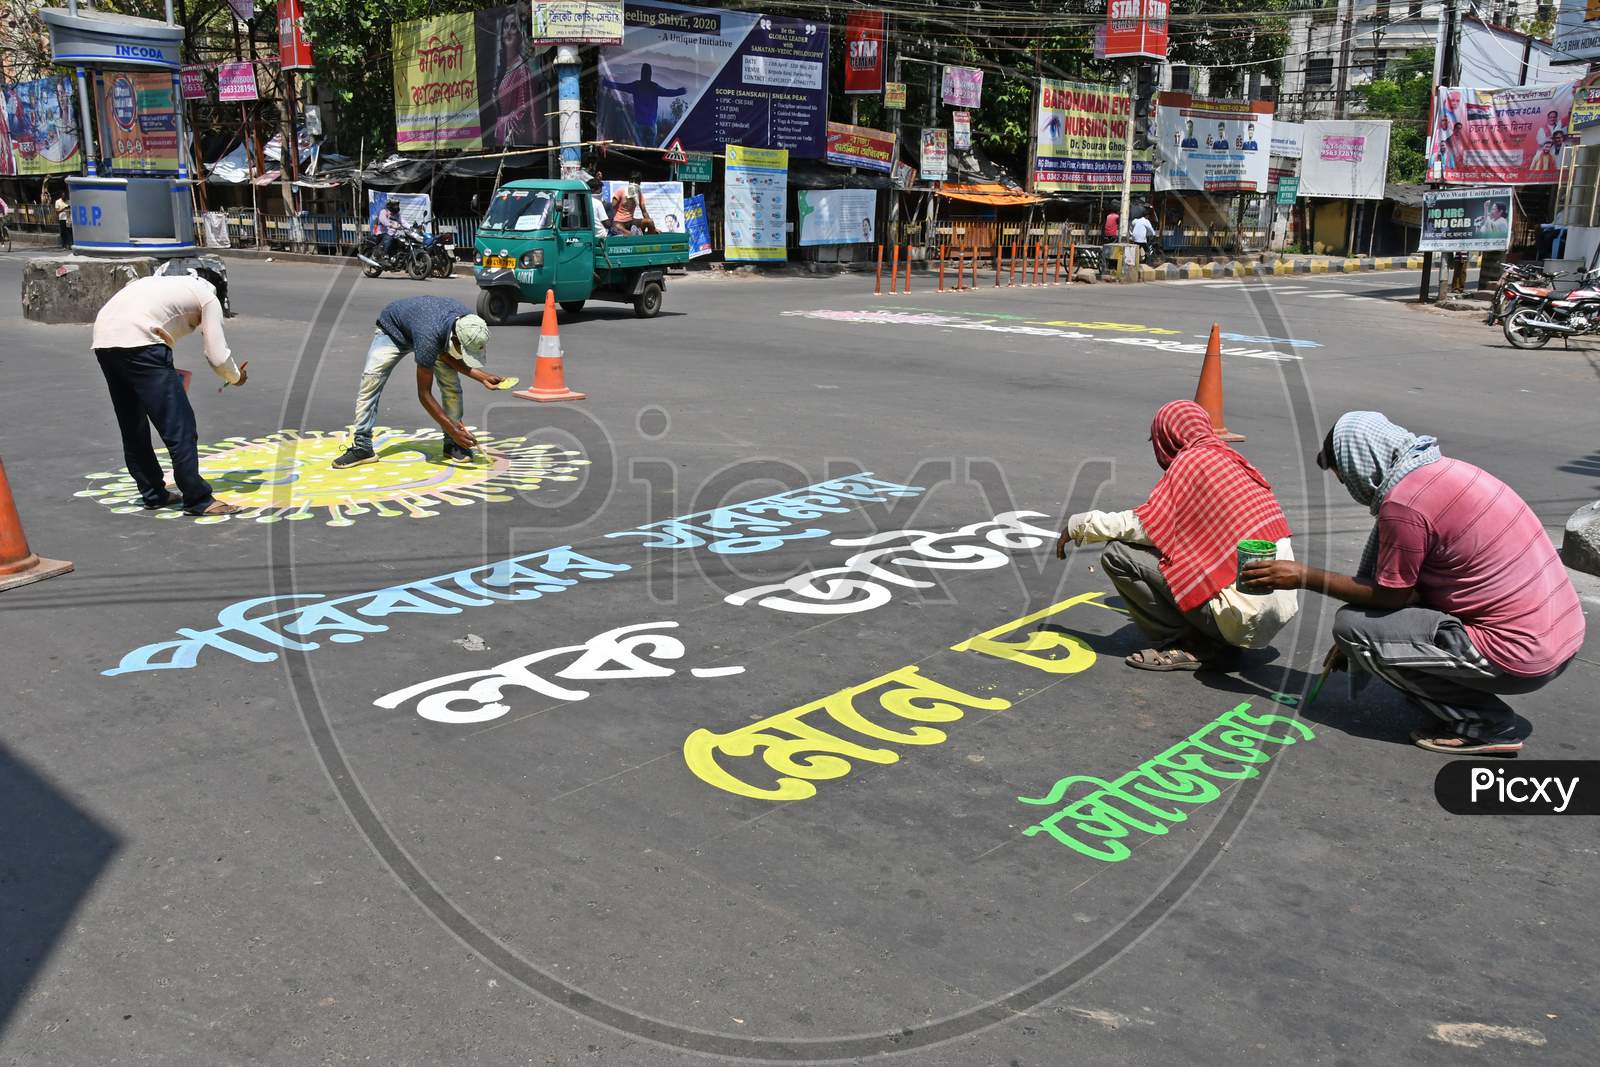 Slogans are painted on the road as part of a campaign to get people to comply with the lockdown to prevent coronavirus or COVID-19 . At Burdwan Town, Purba Bardhaman District, West Bengal, India.